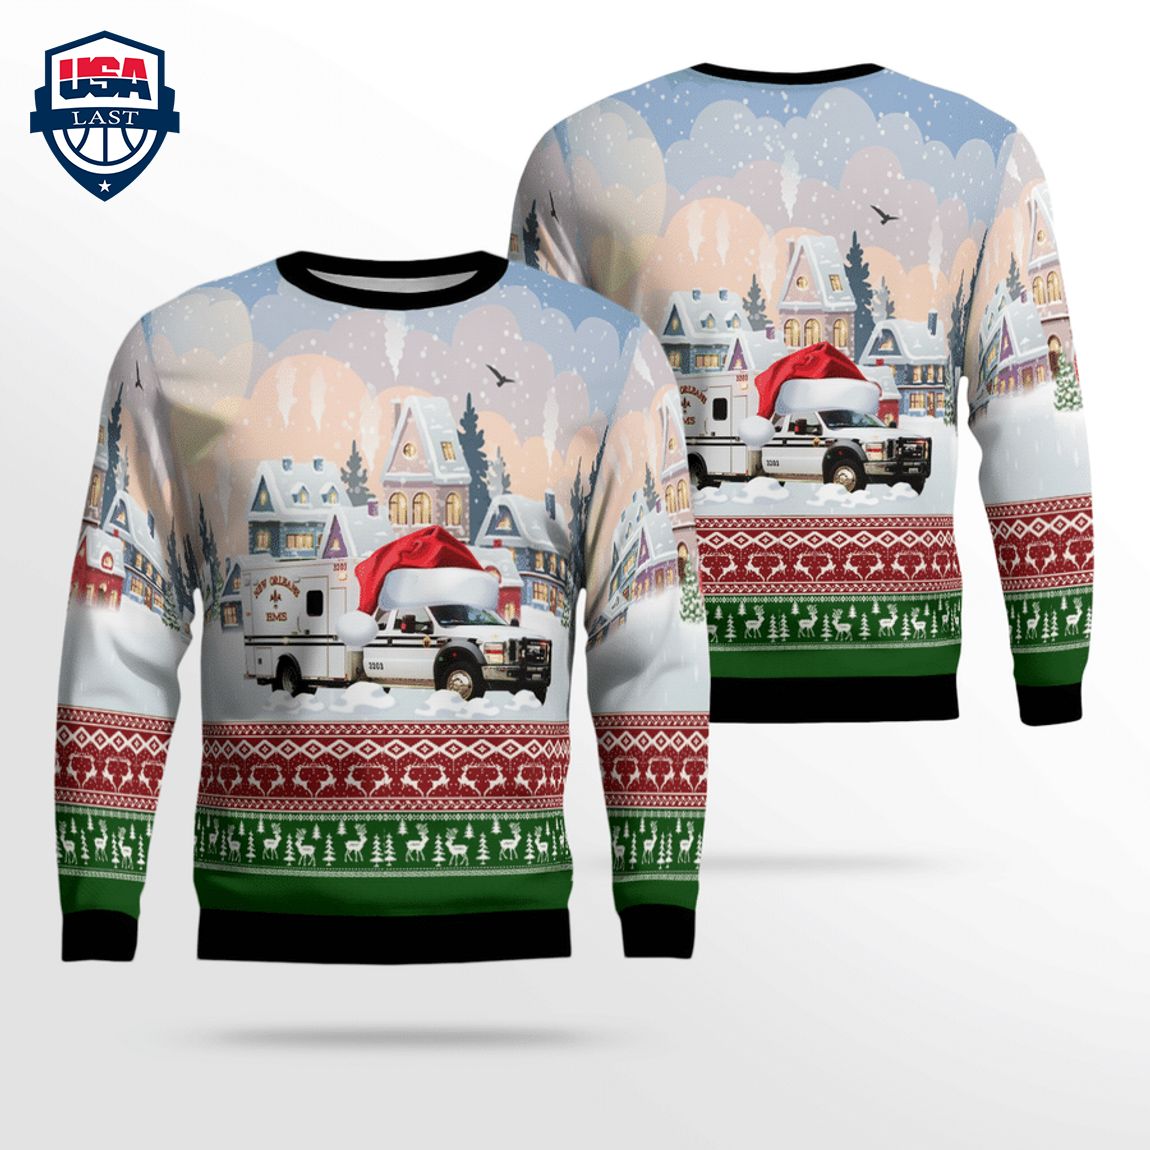 Louisiana New Orleans EMS 3D Christmas Sweater - Nice place and nice picture